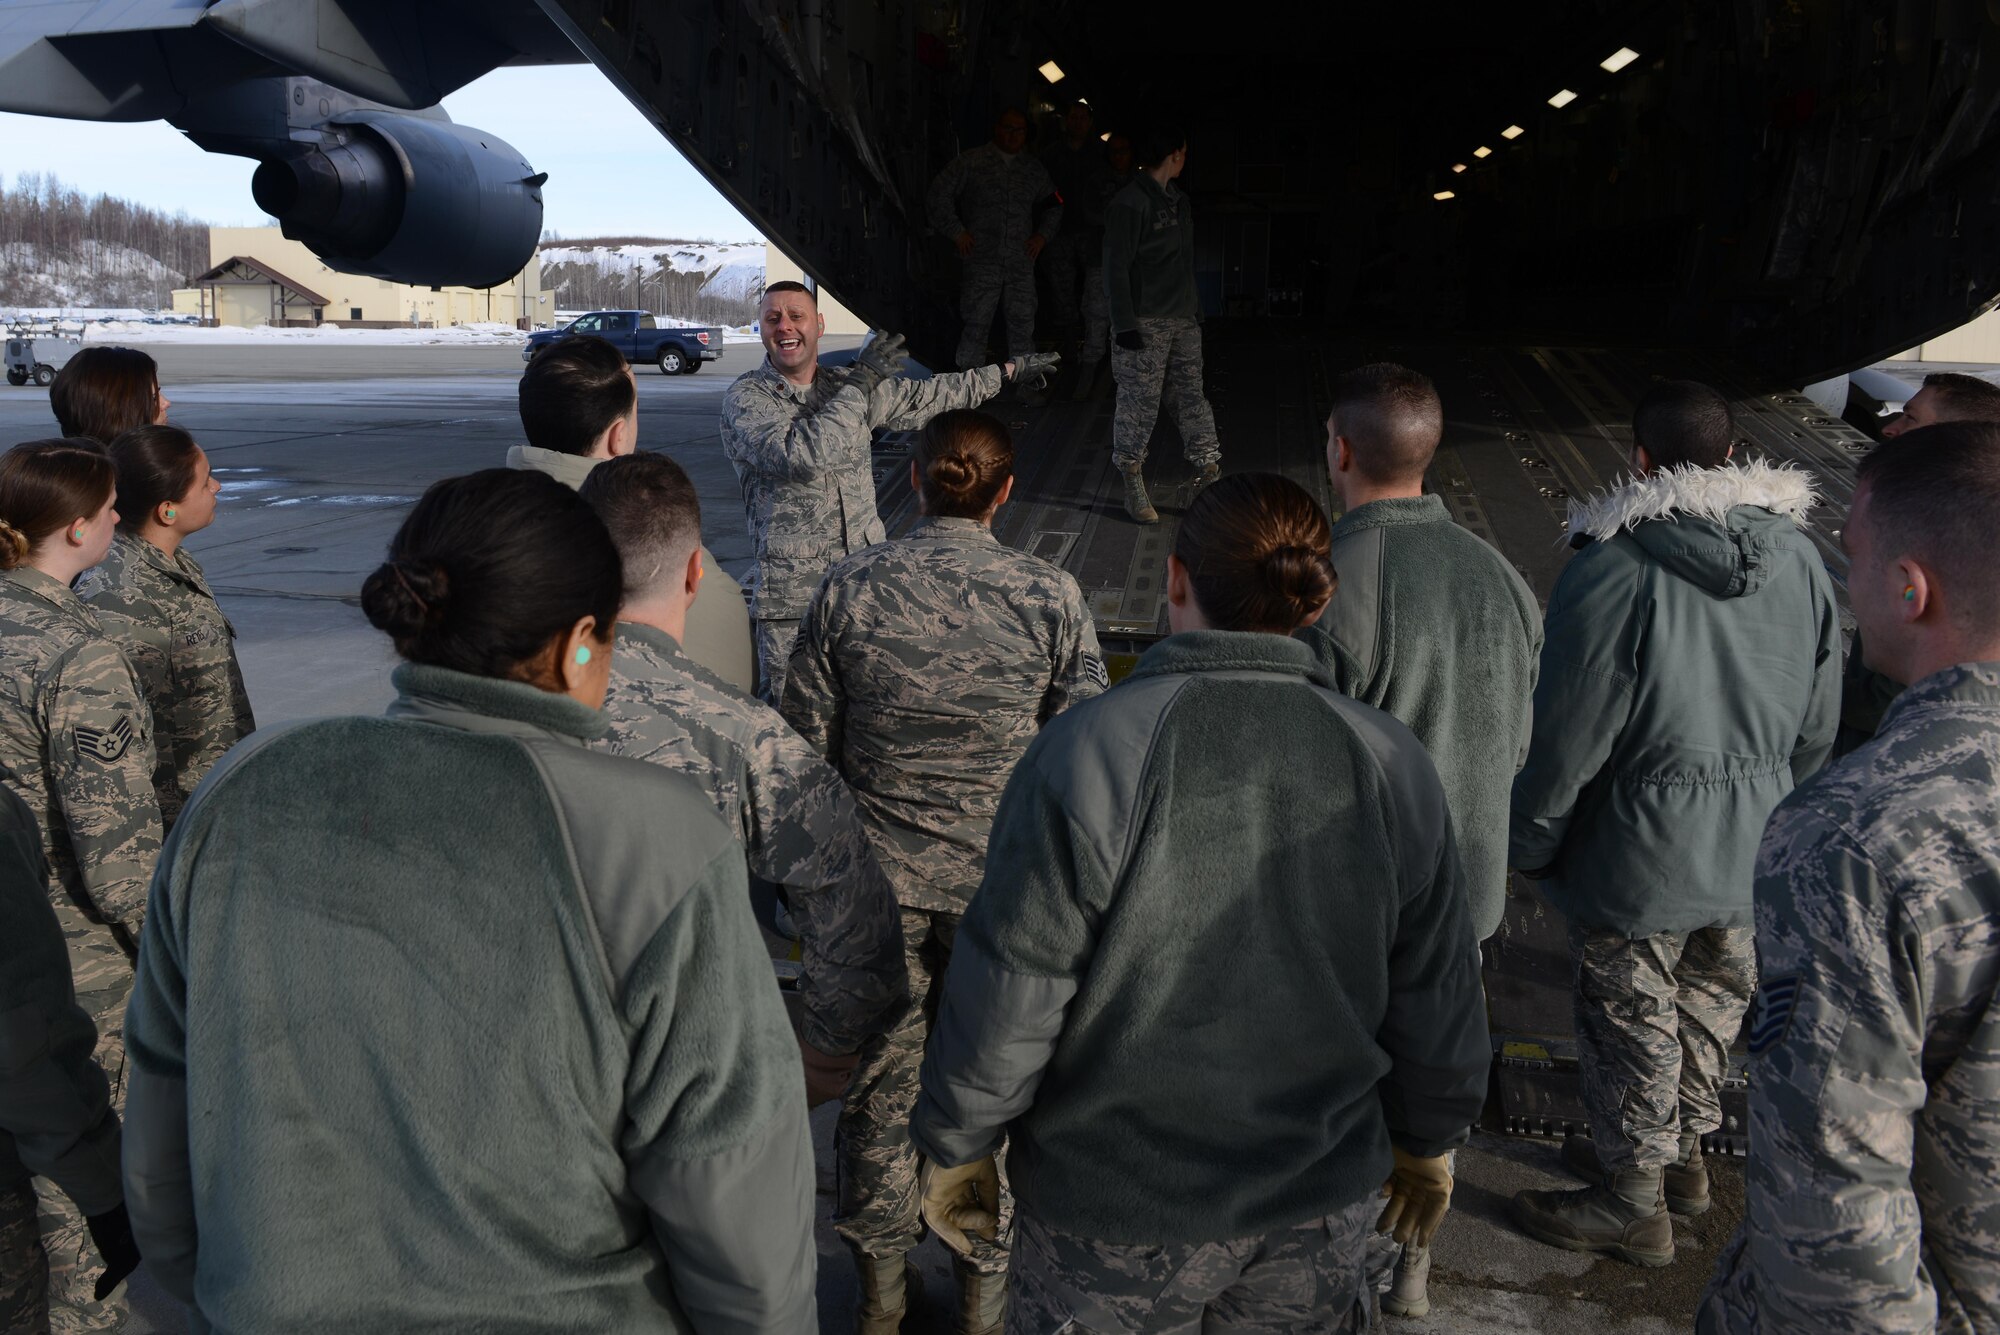 U.S. Air Force Maj. Steven Shea, 673d Medical Group, speaks to all the players and leads the EnRoute Patient Staging System exercise at Joint Base Elmendorf-Richardson, Alaska, April 3, 2017. The ERPSS provides patient reception, limited emergent intervention, and ensures patients are medically and administratively prepared for flight in a safe and timely aeromedical evacuation. 